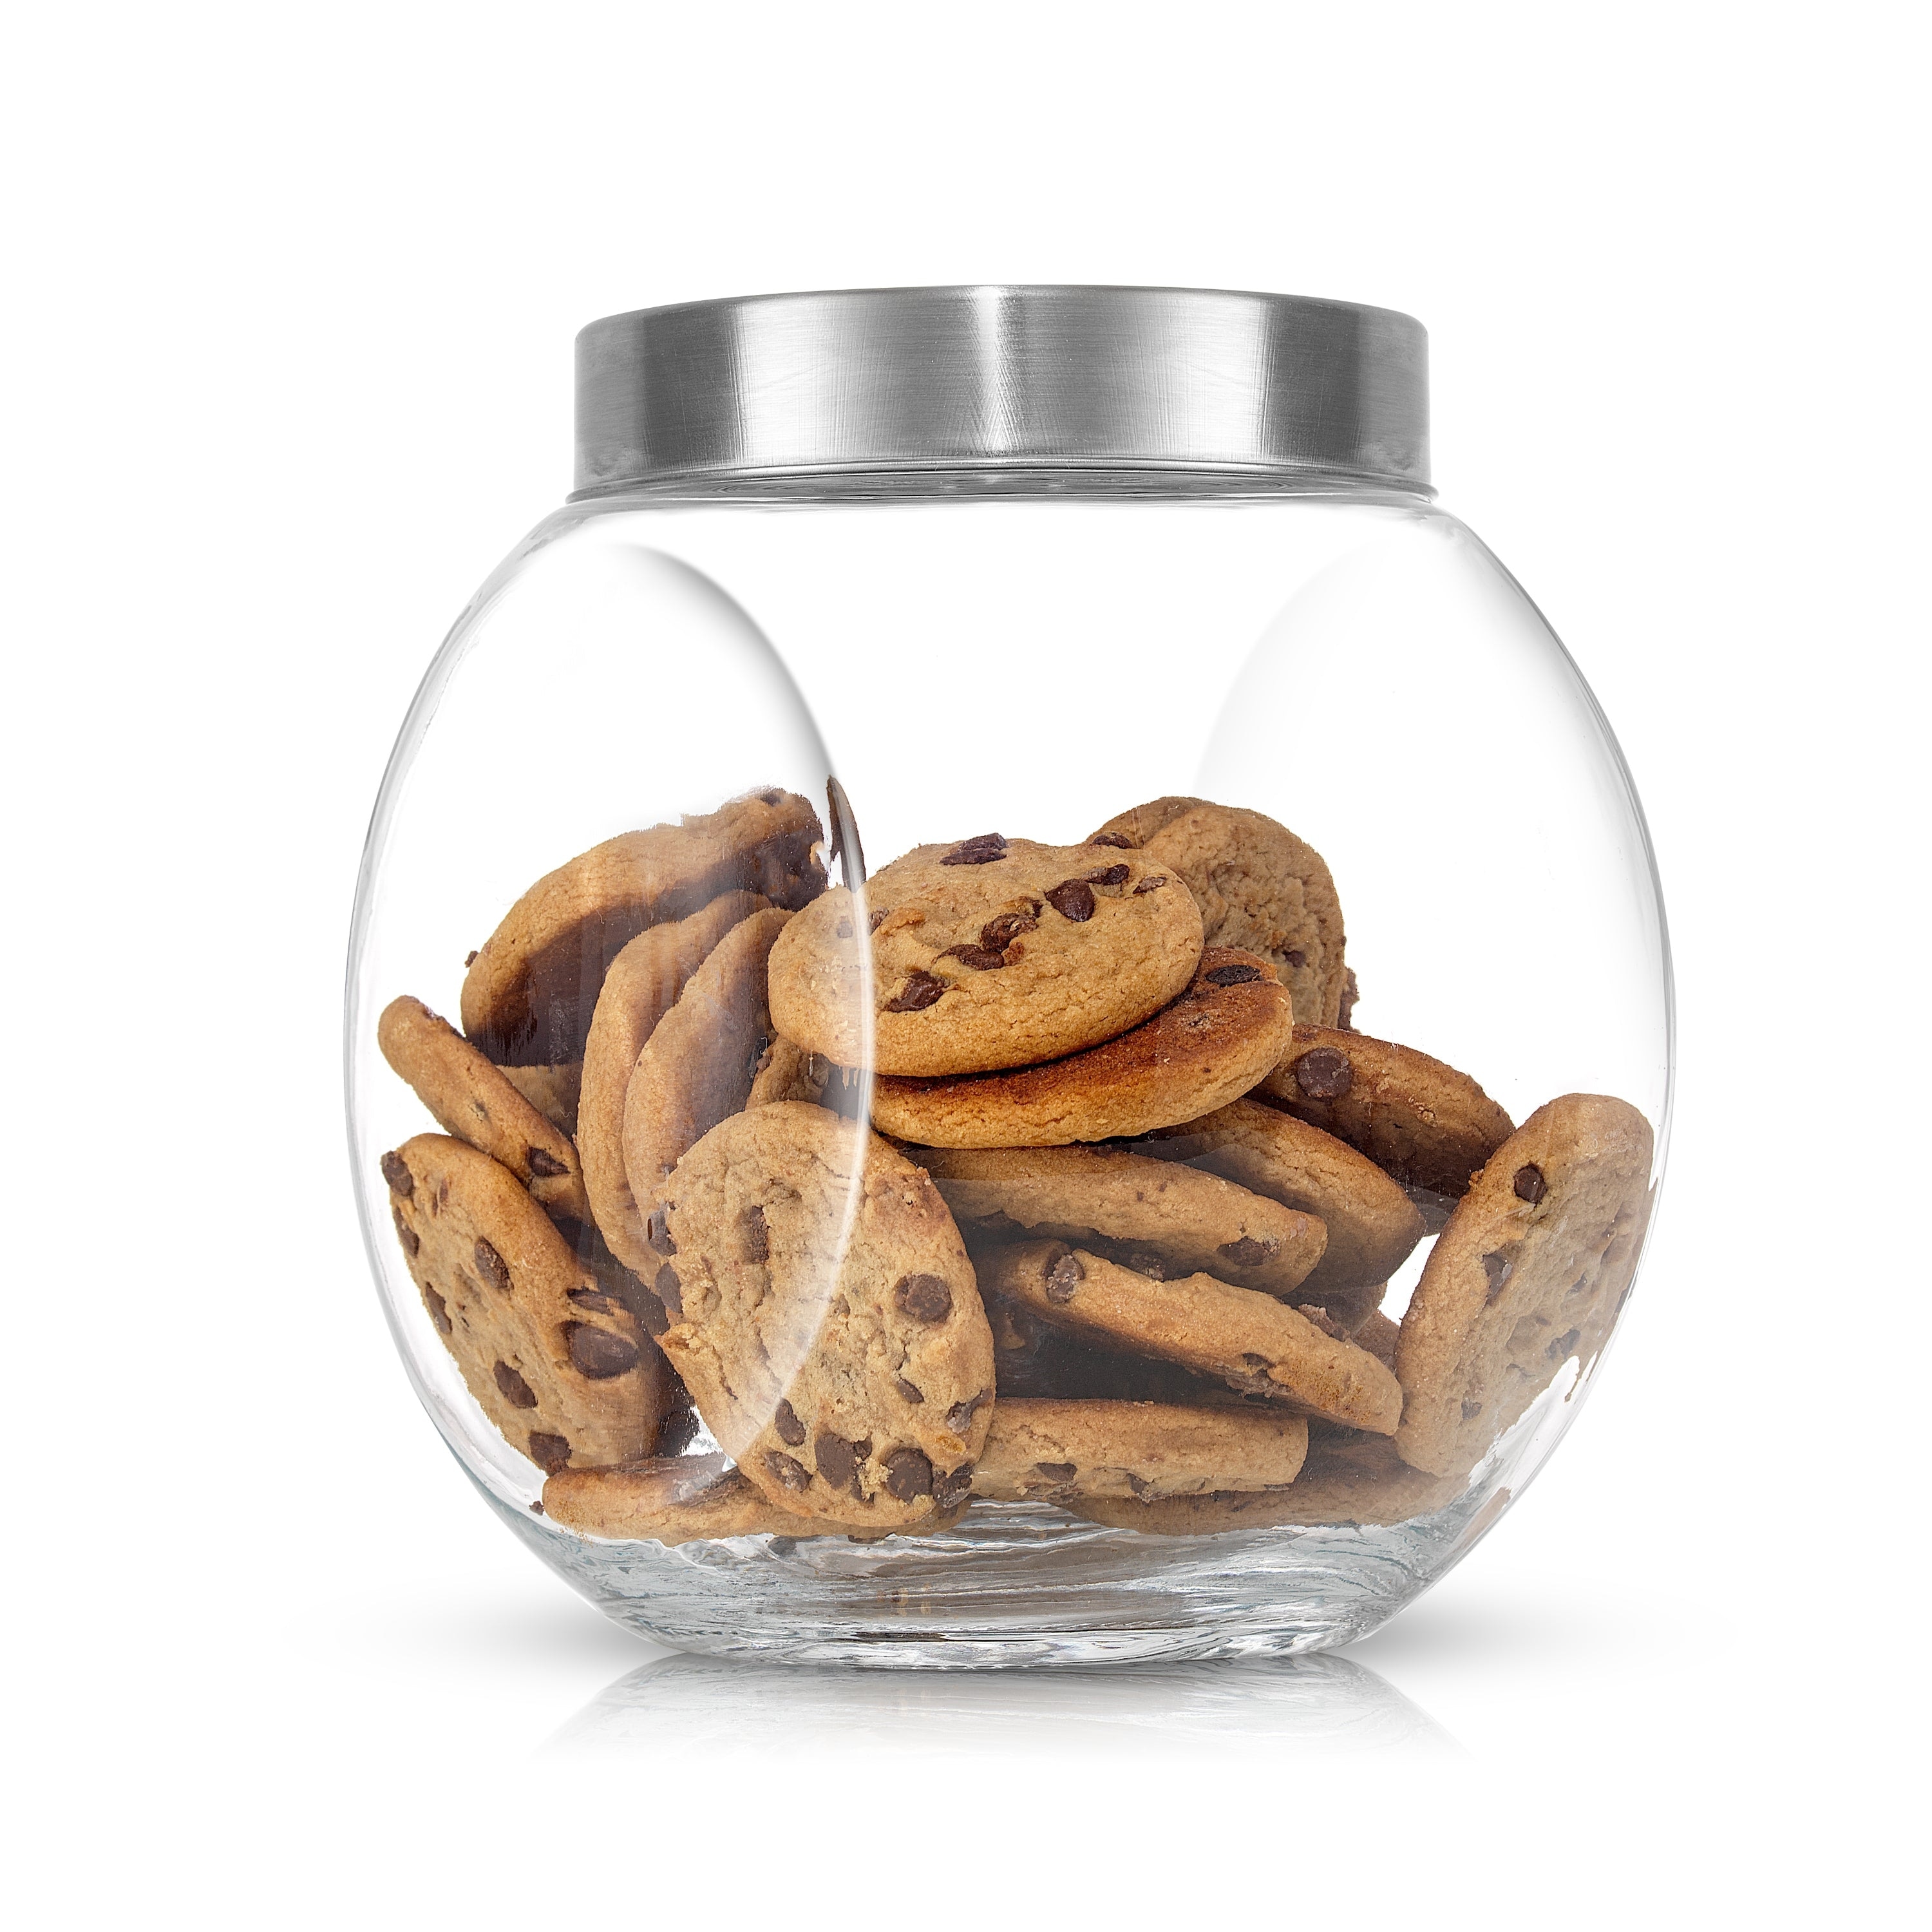 https://ak1.ostkcdn.com/images/products/is/images/direct/0a7afcc3f476ae935bed54e9712b309e7cc42cea/JoyFul-Round-Glass-Cookie-Jar-with-Airtight-Lids---67-oz---Set-of-2.jpg